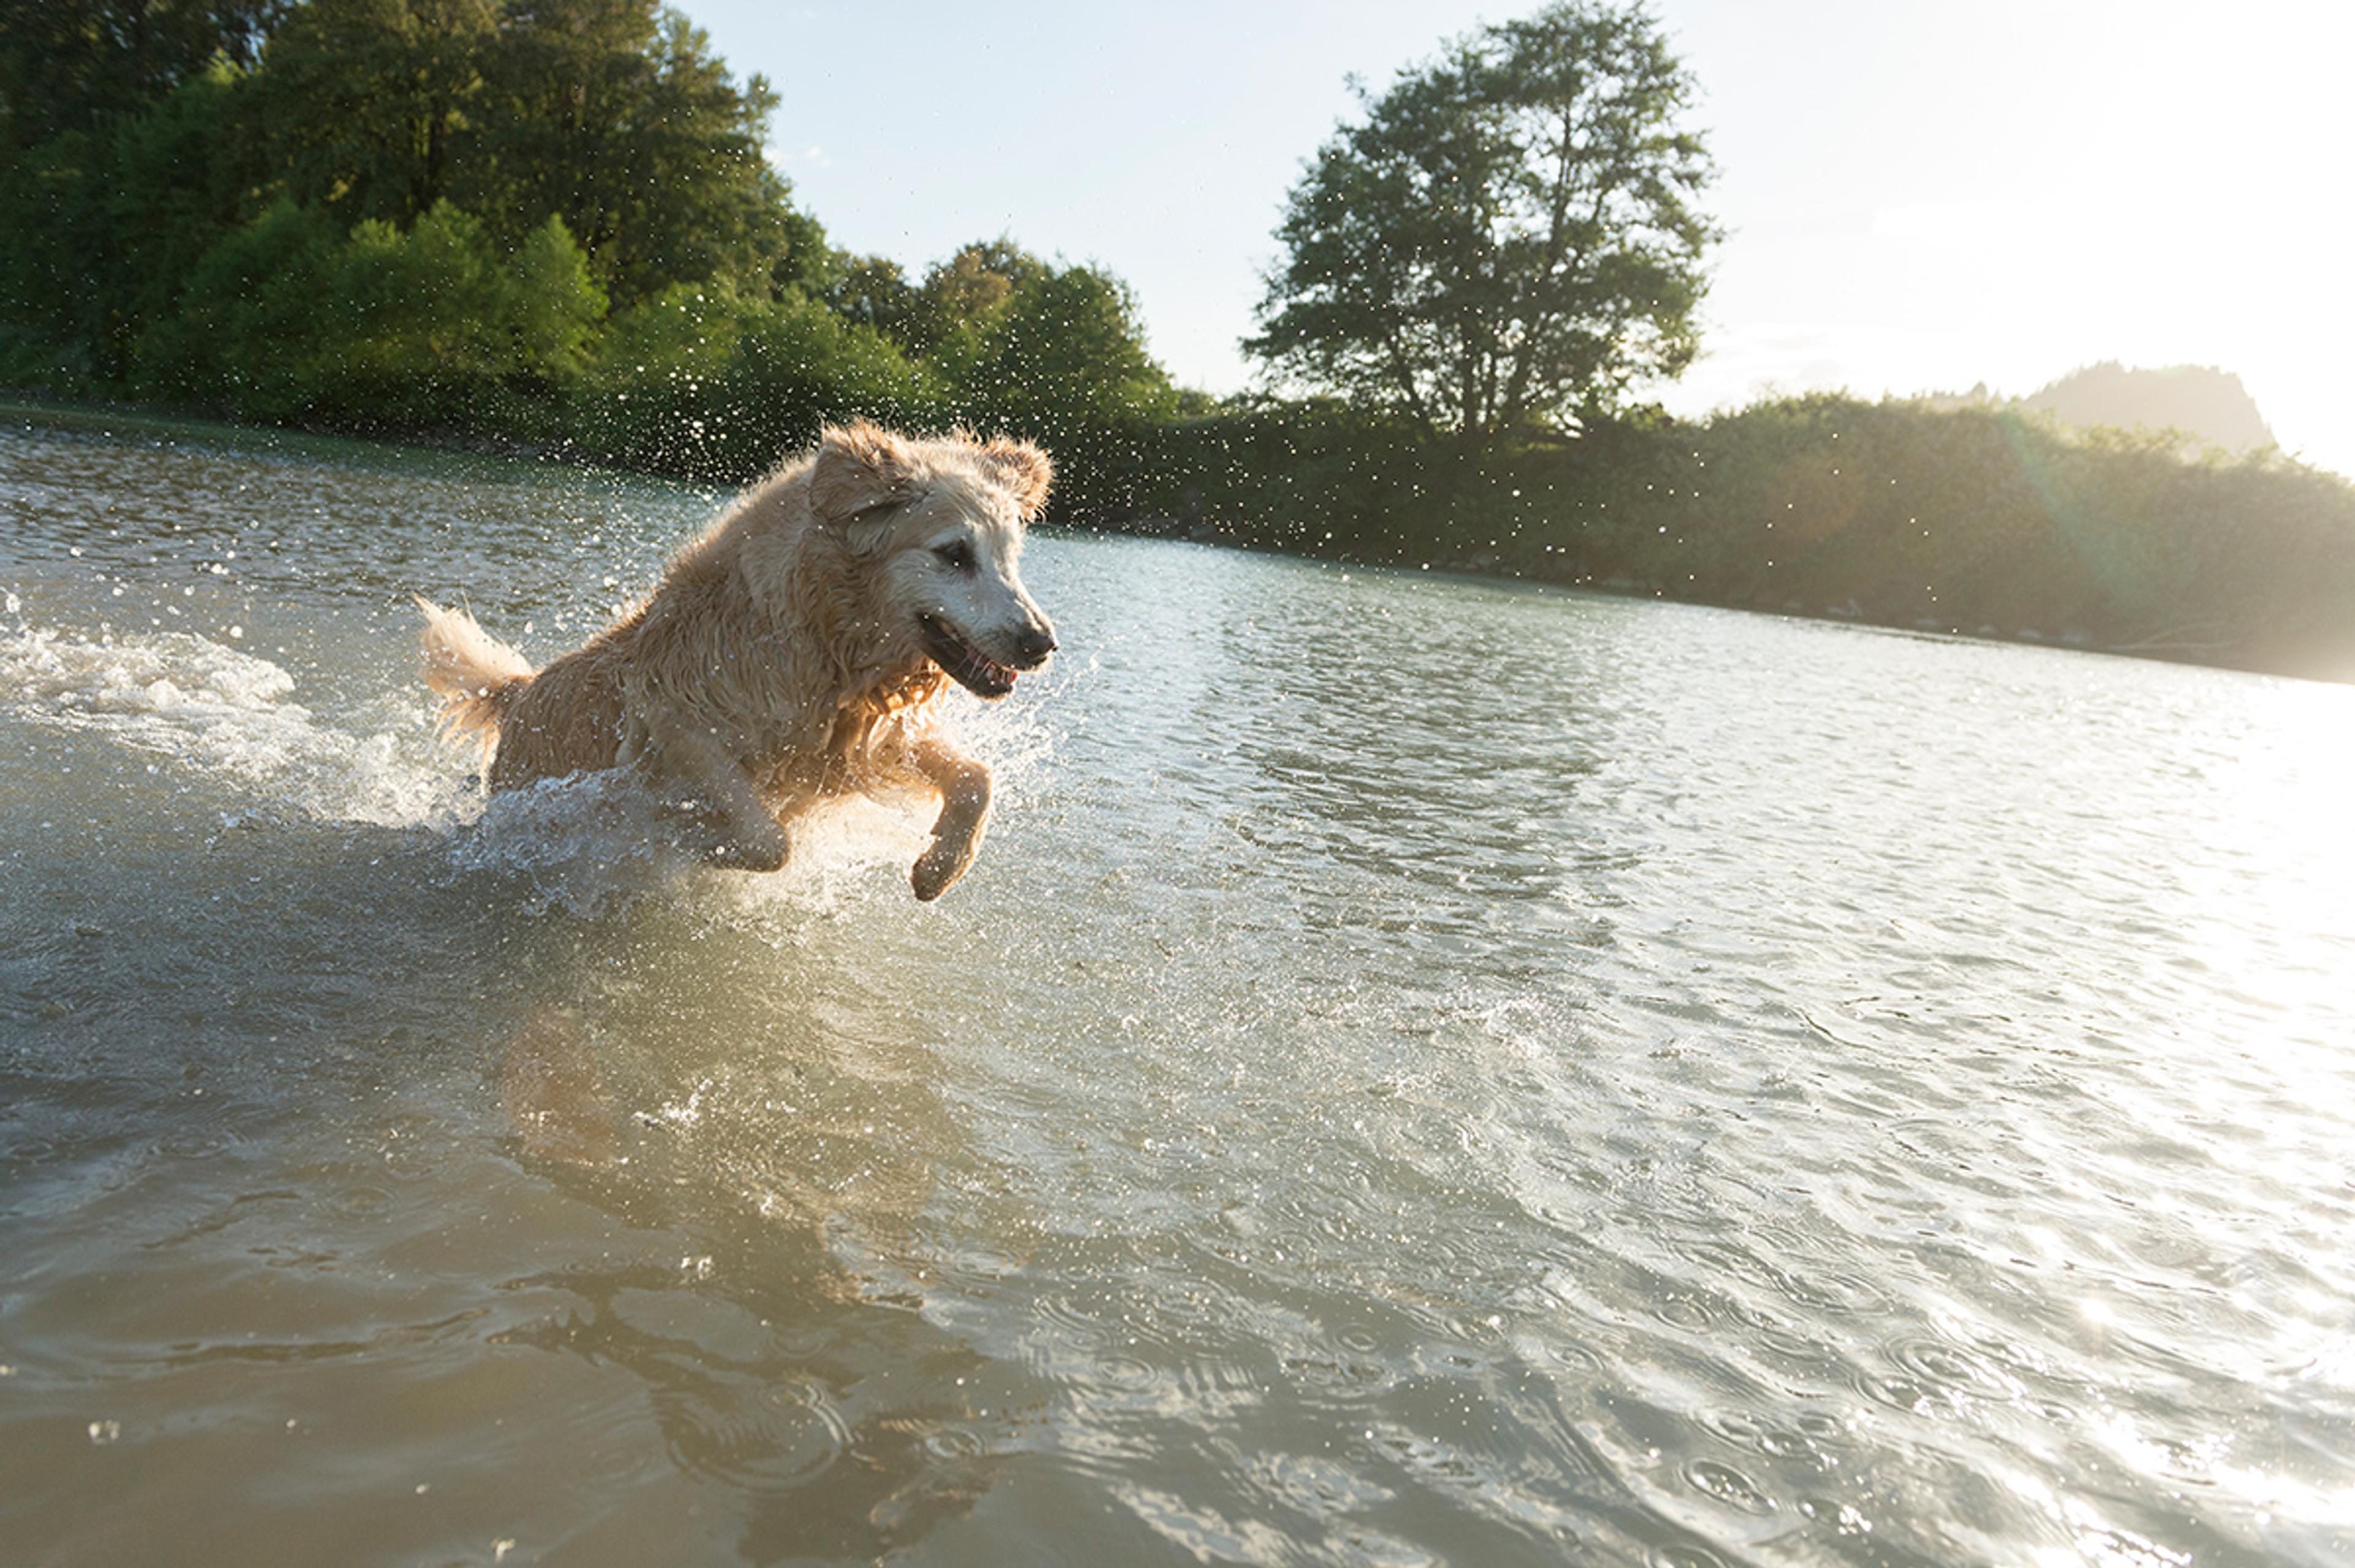 An action shot of a golden retriever leaping out of the water at sunset with droplets of water in the air.